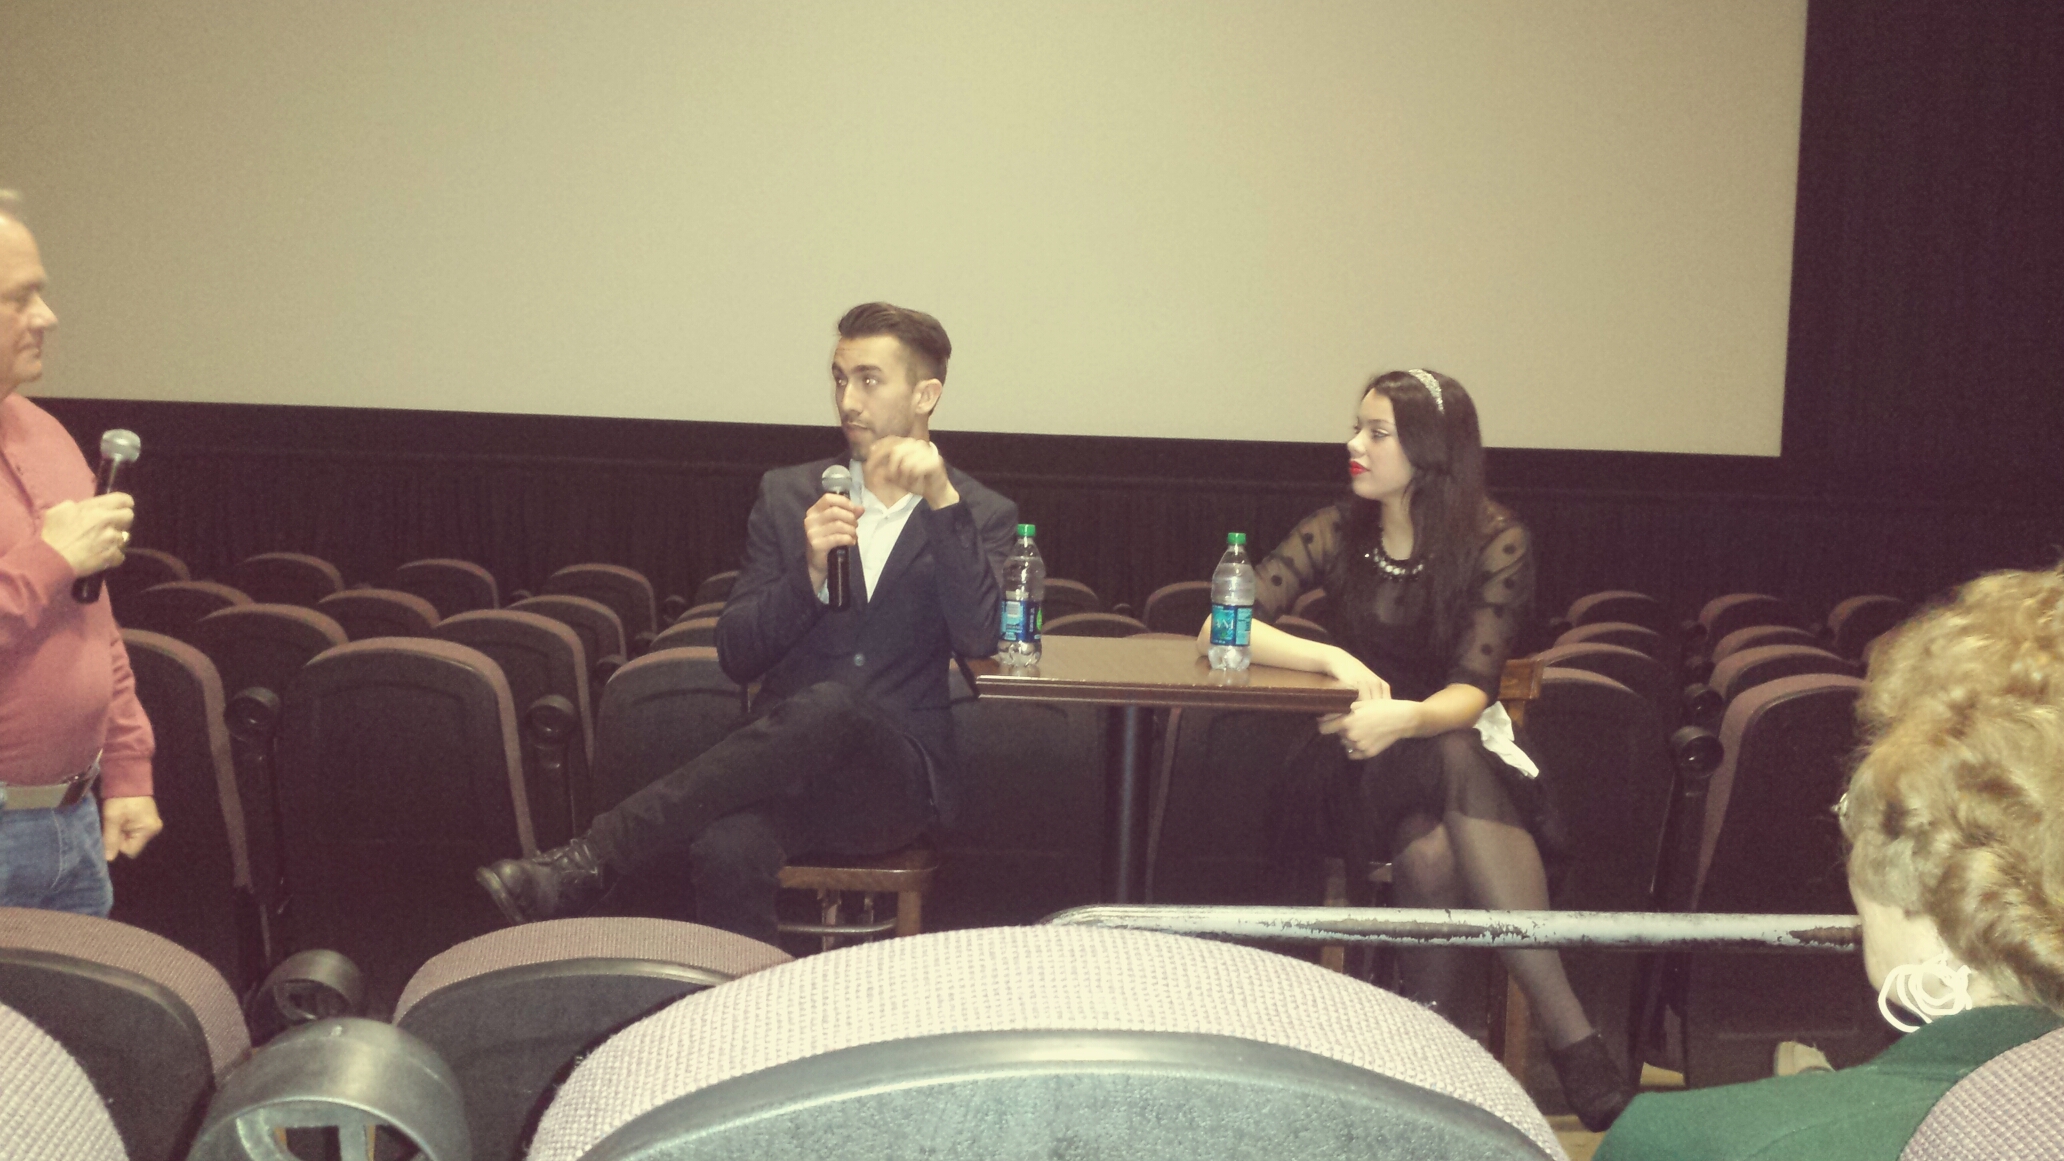 At Middleton Q&A with cast members Kenny Parks Jr and Victoria James